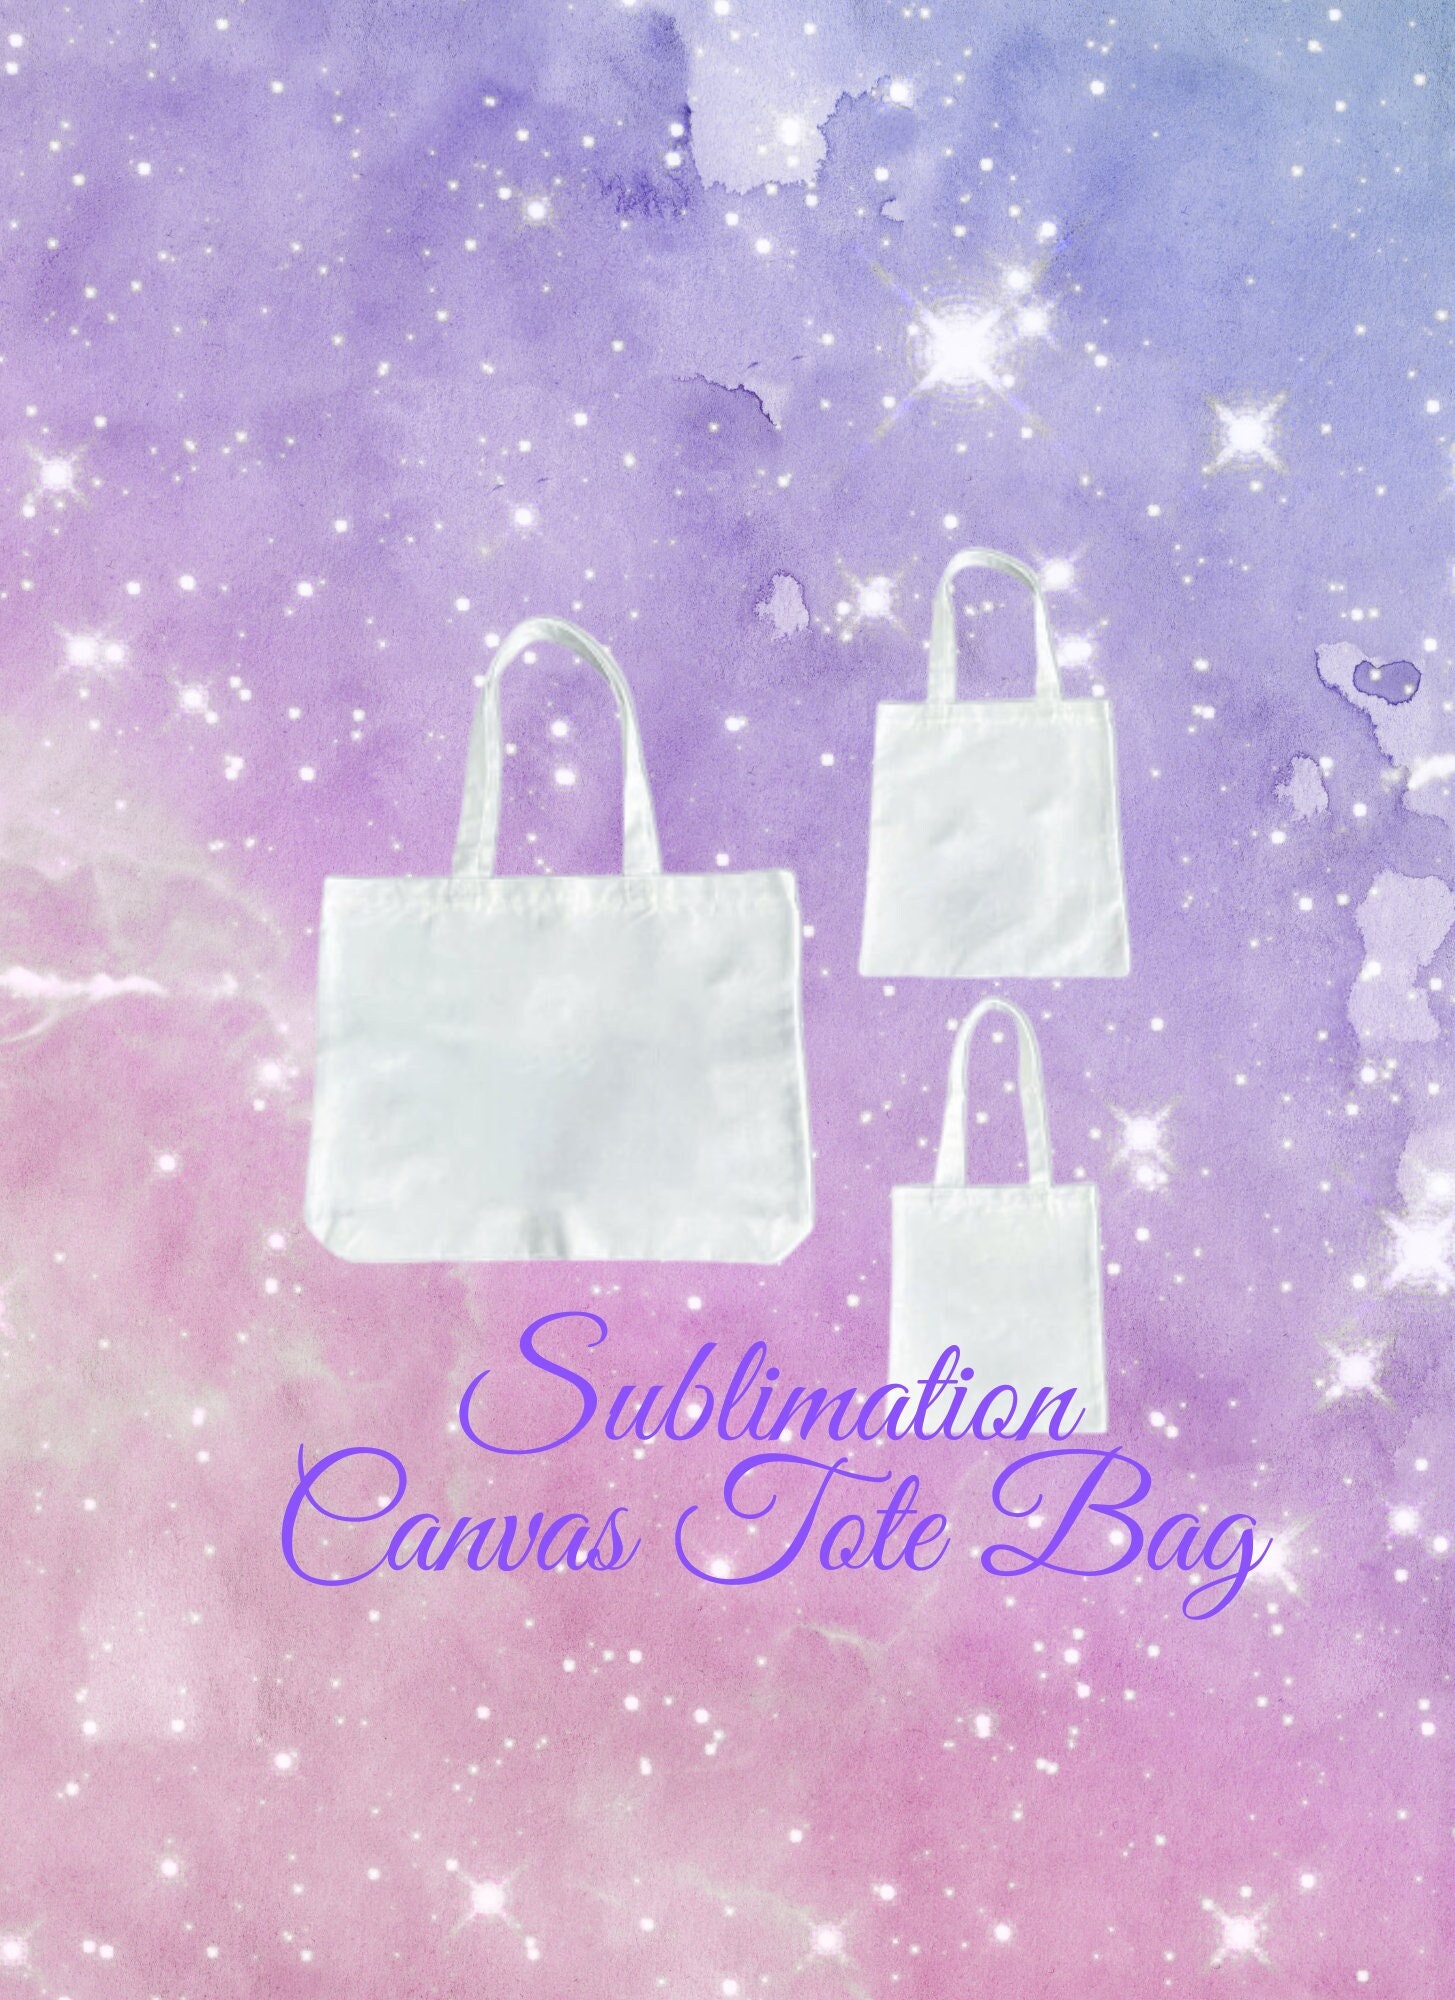 Blank everyday cotton tote bags